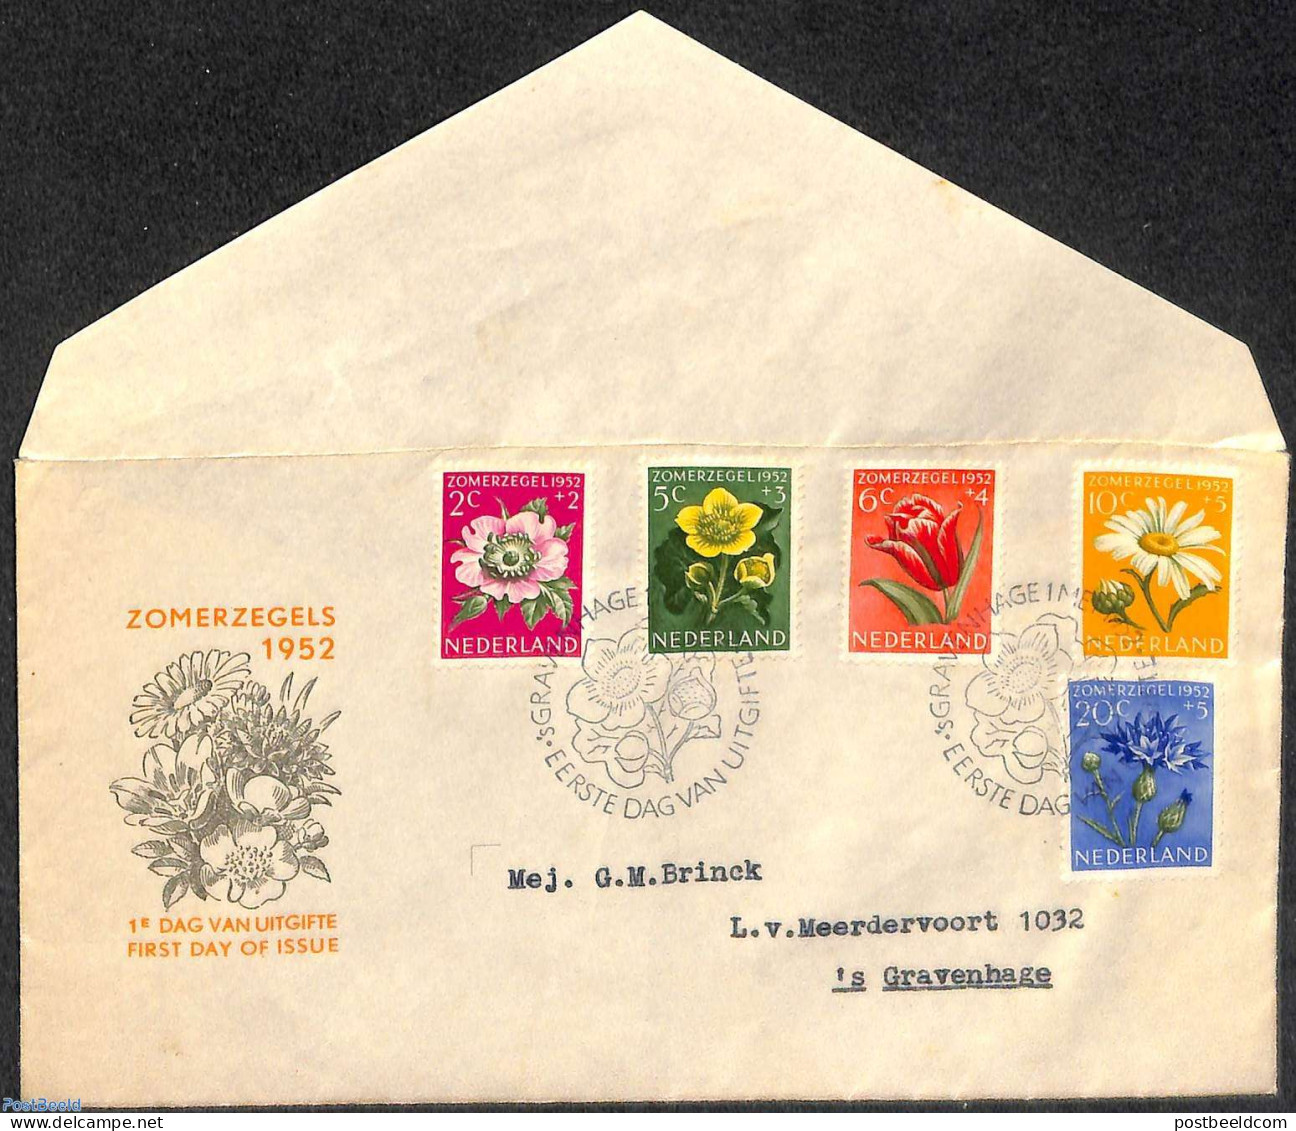 Netherlands 1952 Flowers FDC, Open Flap, Typed Address, Very Fresh Cover, First Day Cover, Nature - Flowers & Plants - Covers & Documents